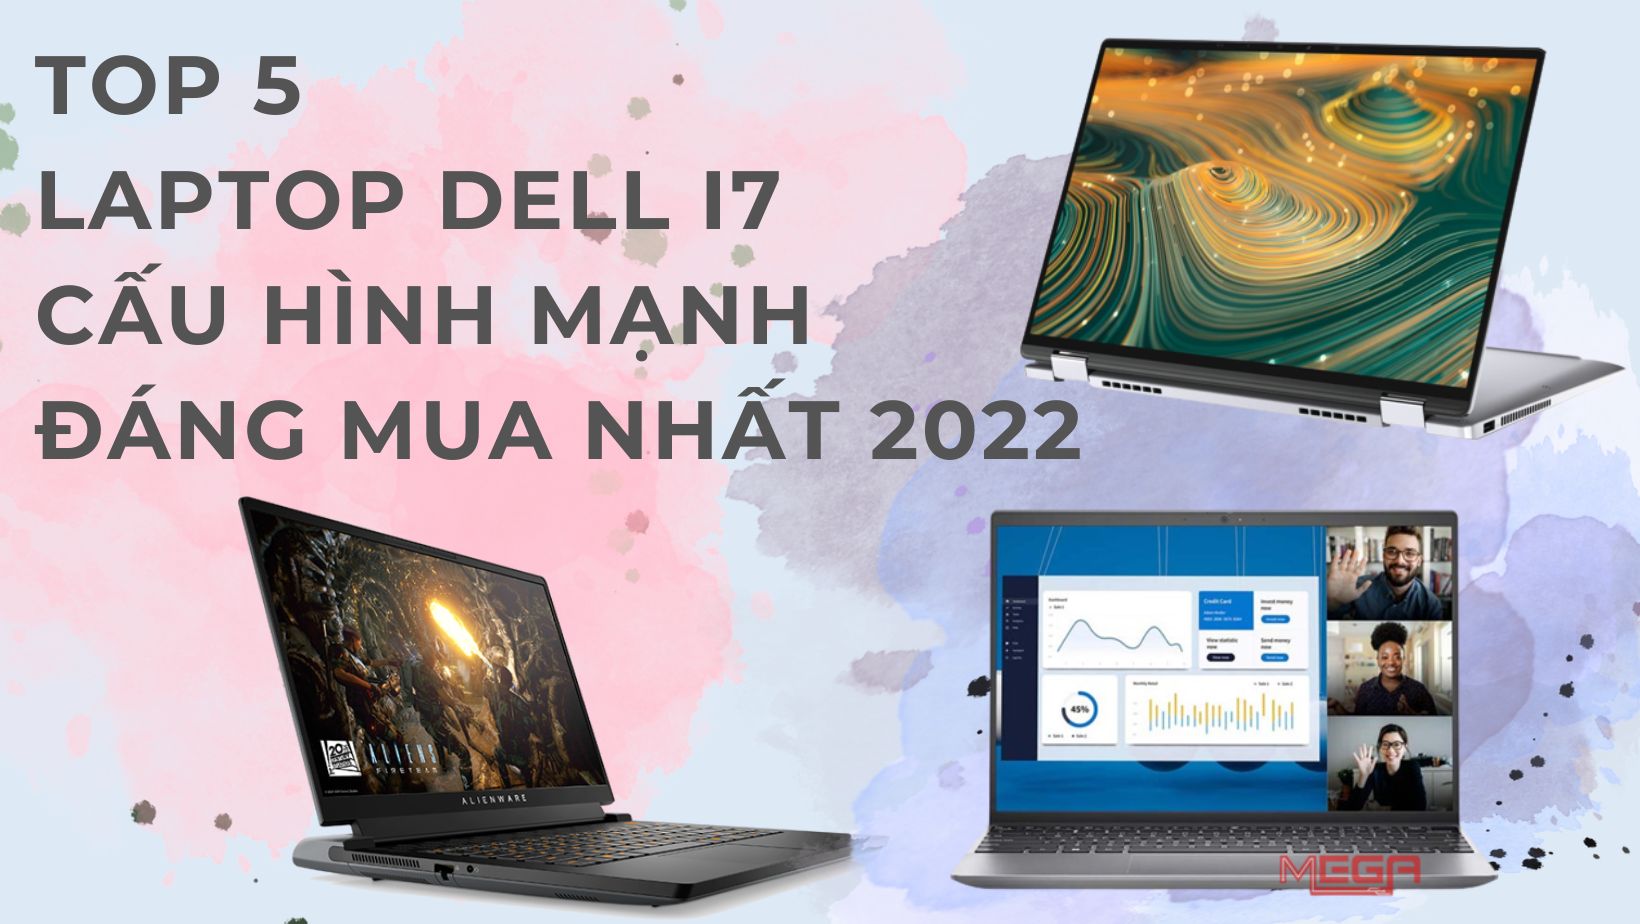 Top laptop Dell i7